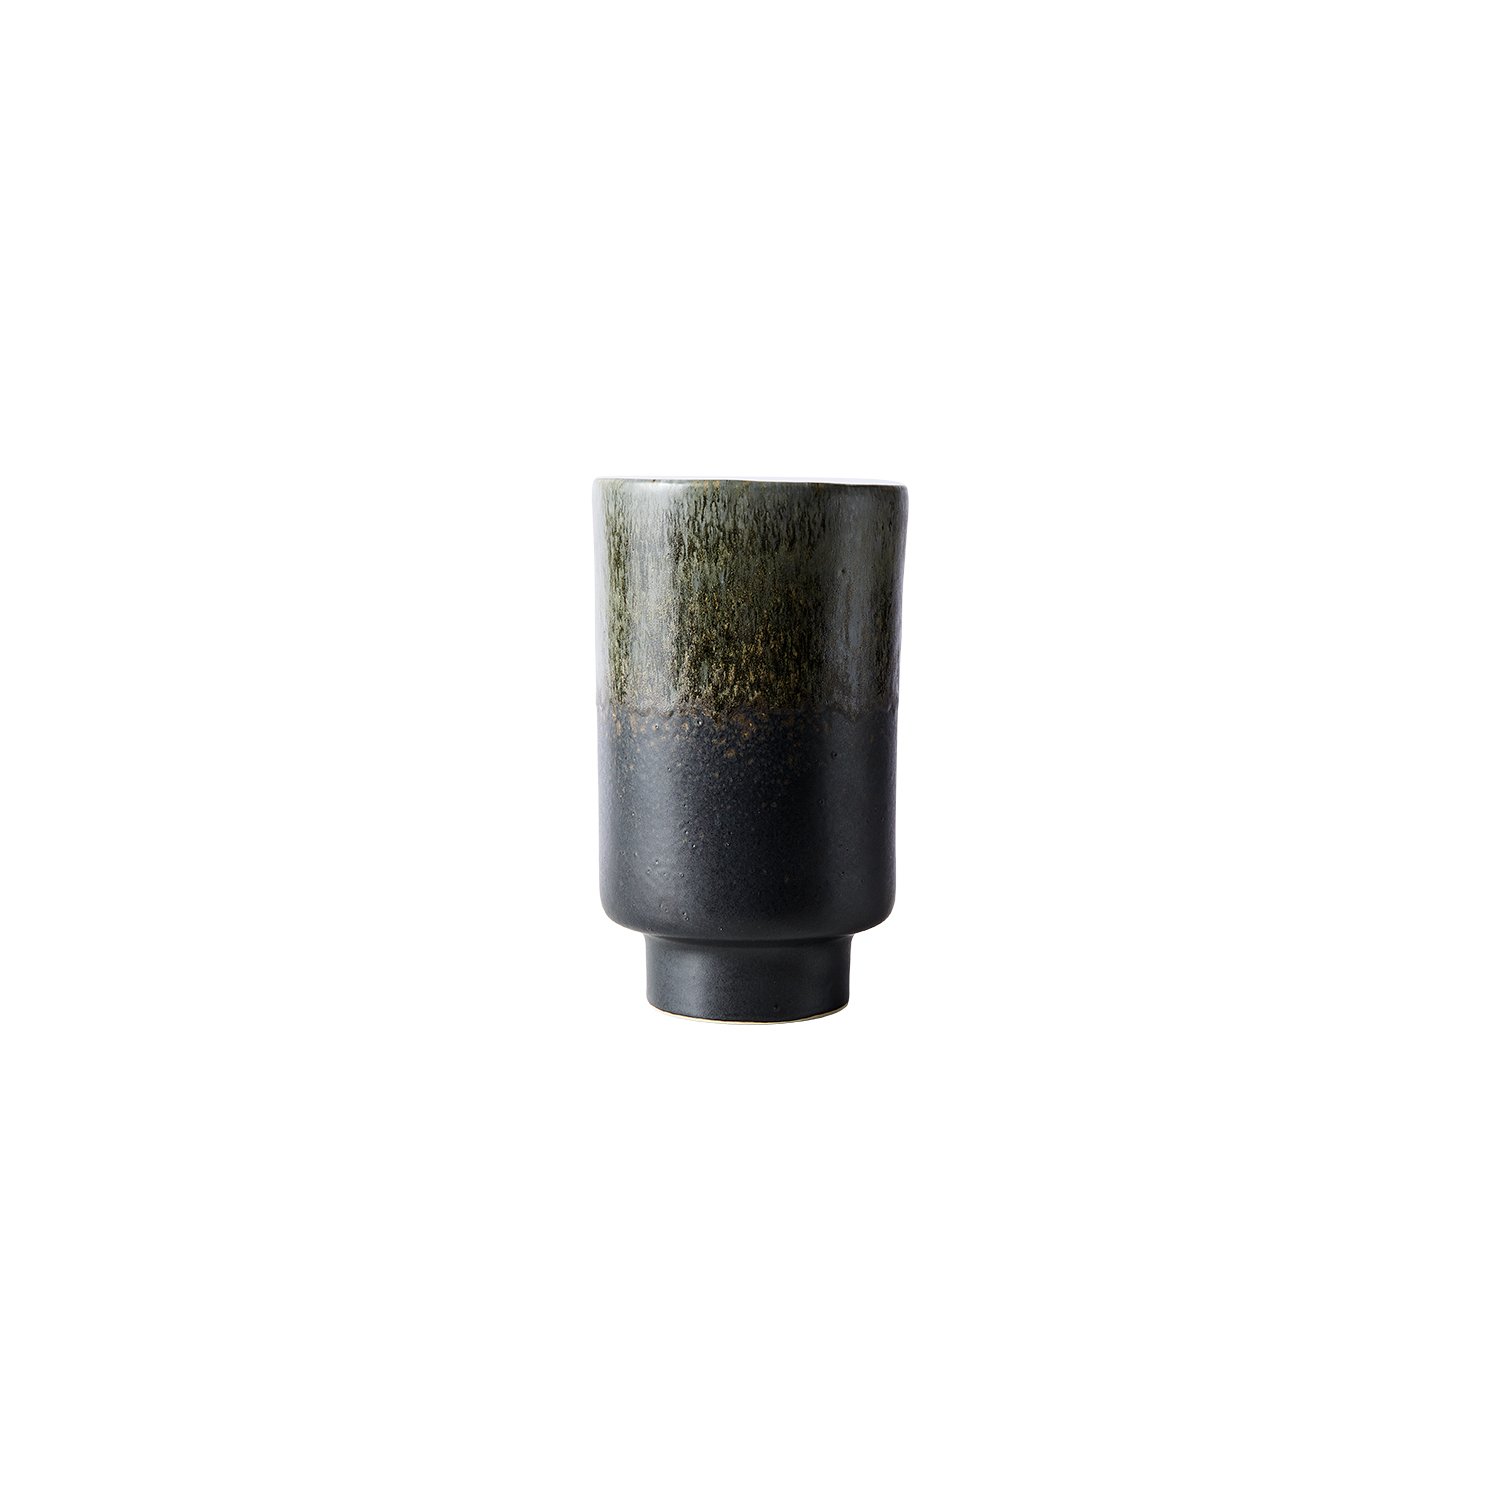 6: Muubs - Vase Lago M - Forest Green (9160002165)